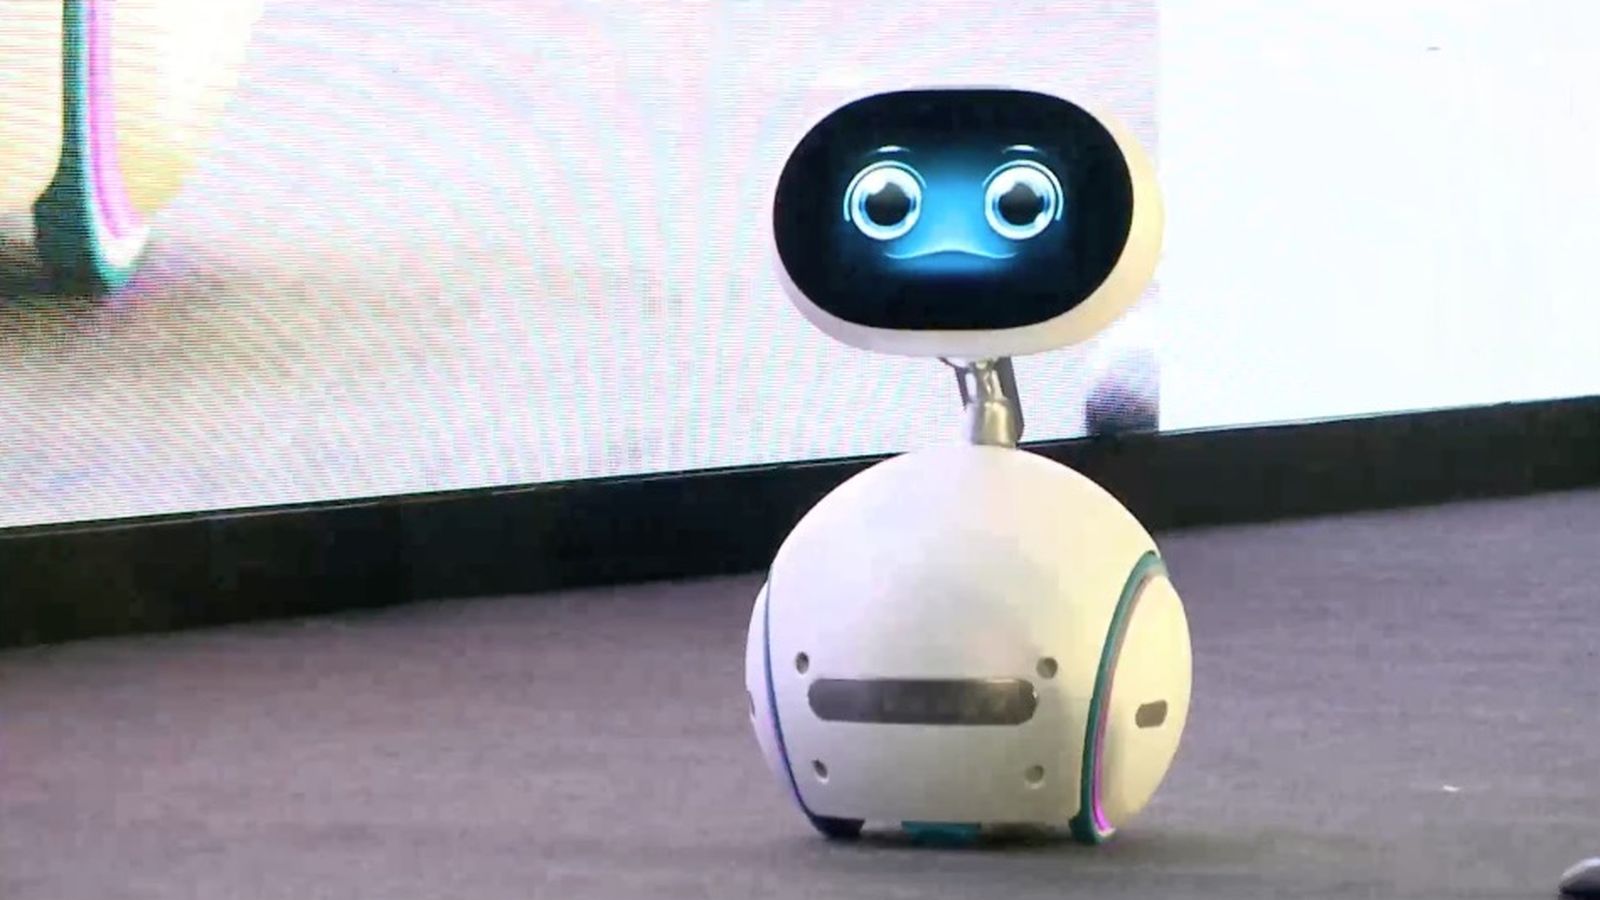 dynasti Økonomi rod Asus Zenbo - A robot that can take control of your living room